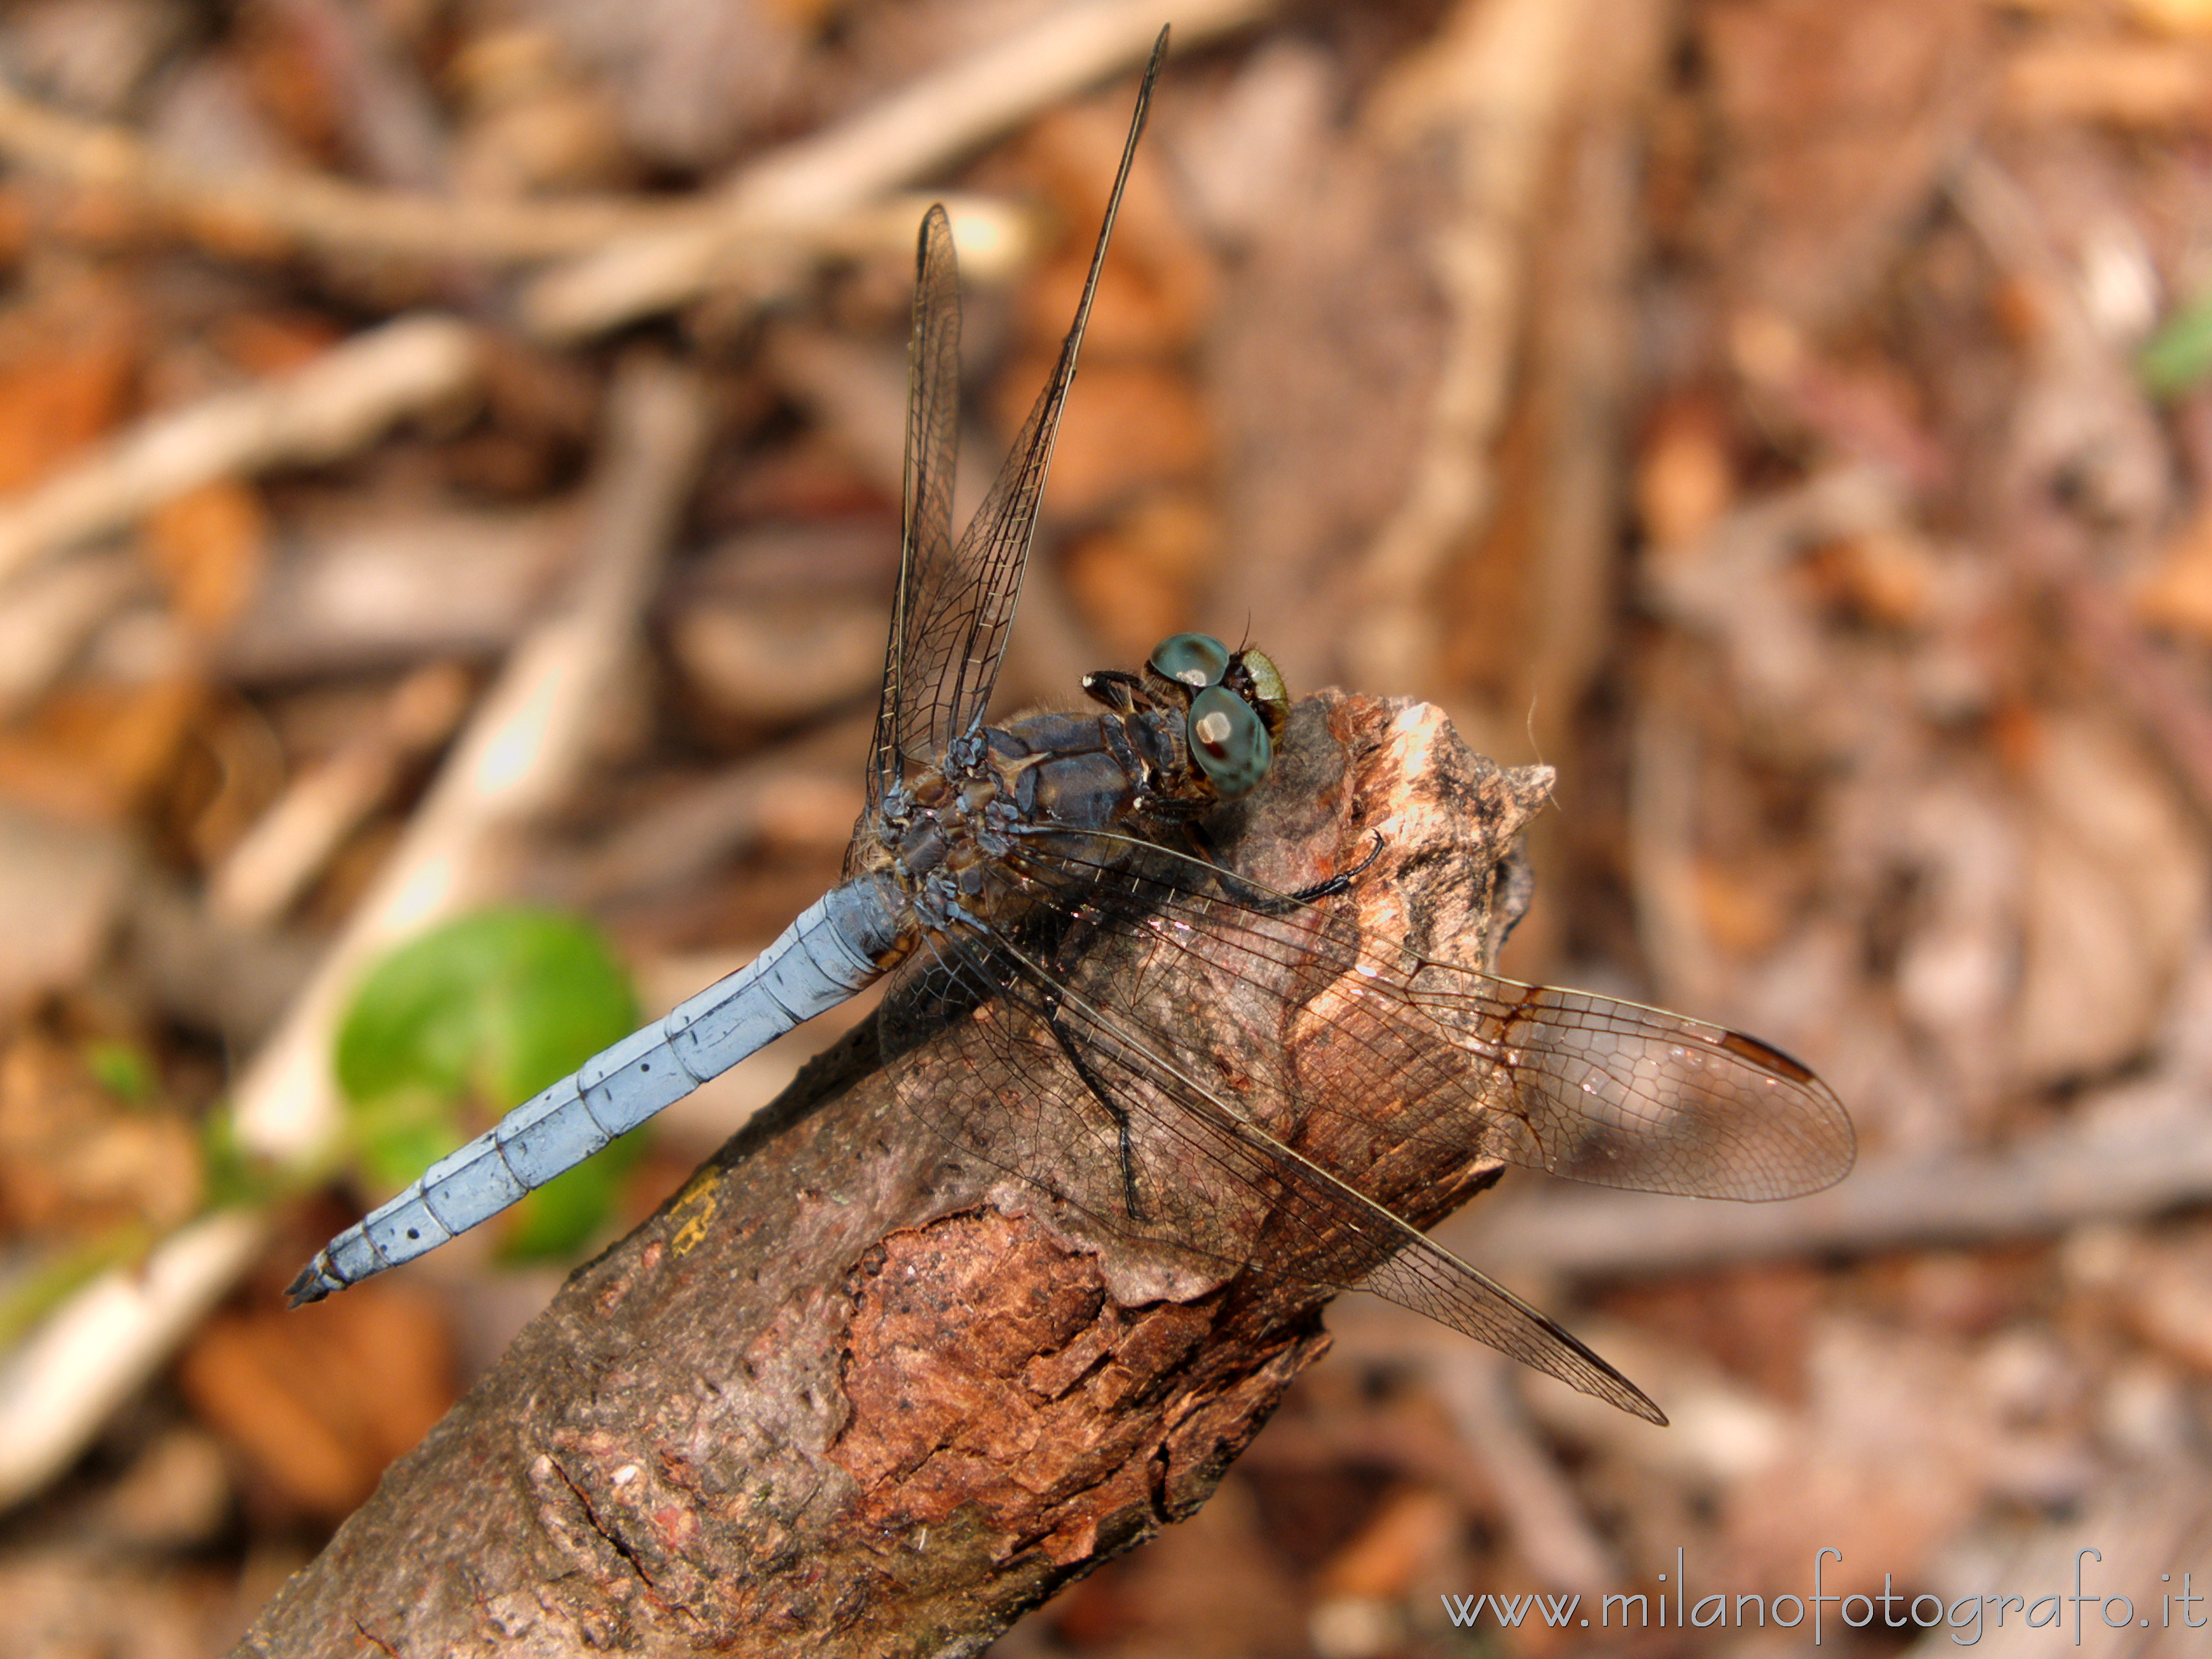 Cadrezzate (Varese, Italy): Most probably male Orthetrum coerulescens  - Cadrezzate (Varese, Italy)